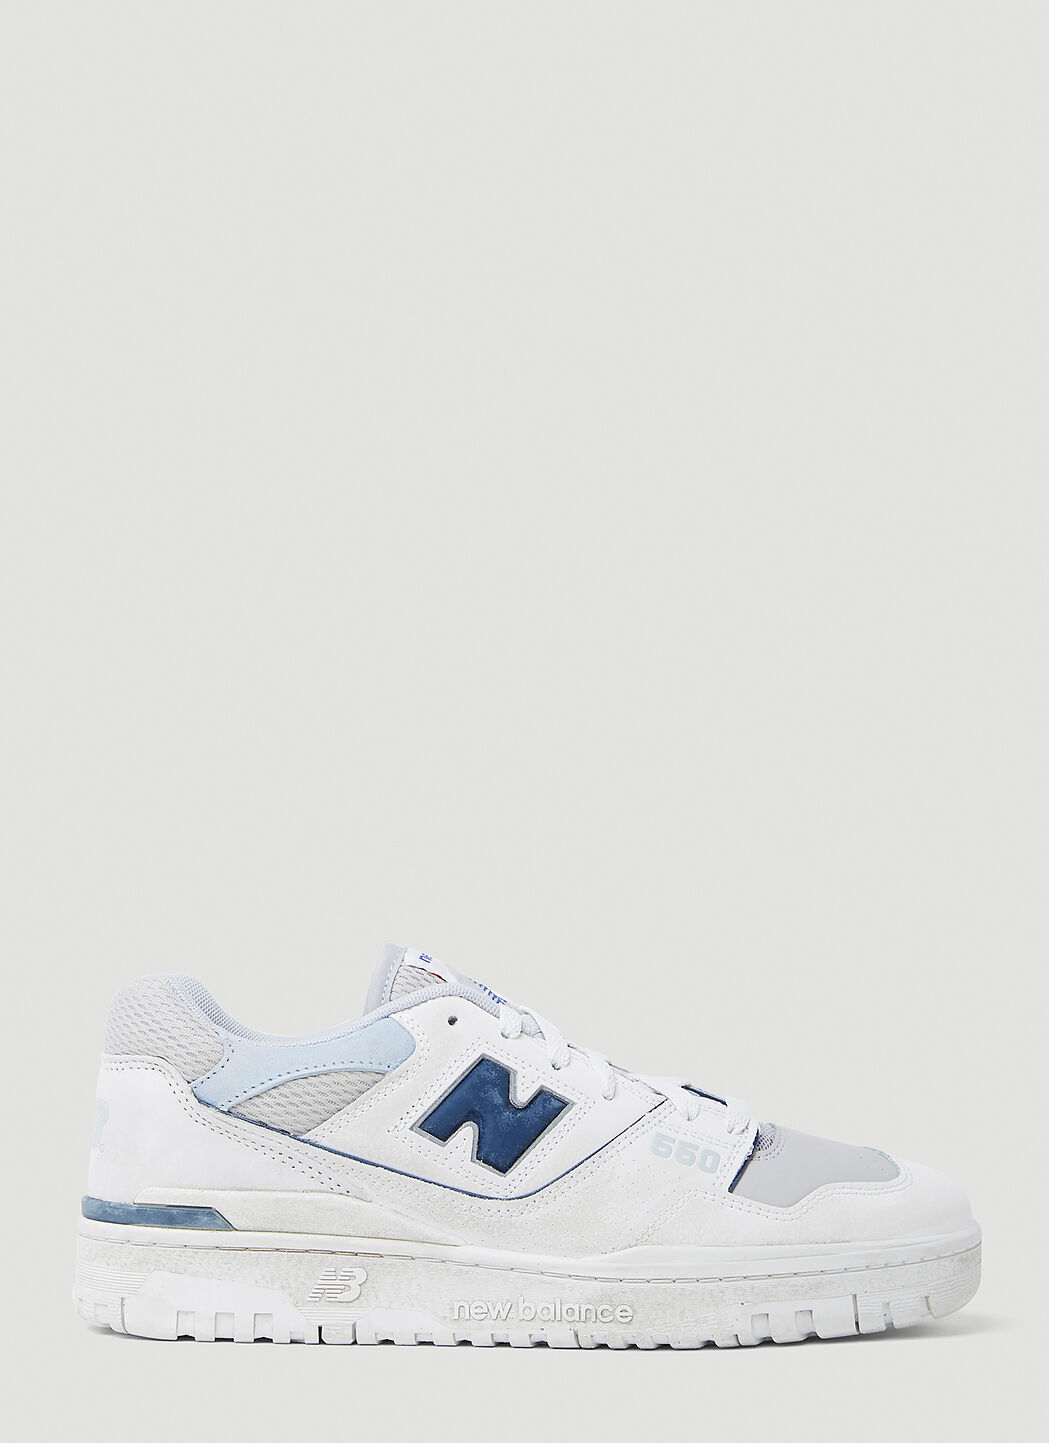 New Balance Sneakers & Shoes for Men | Discover at LN-CC®